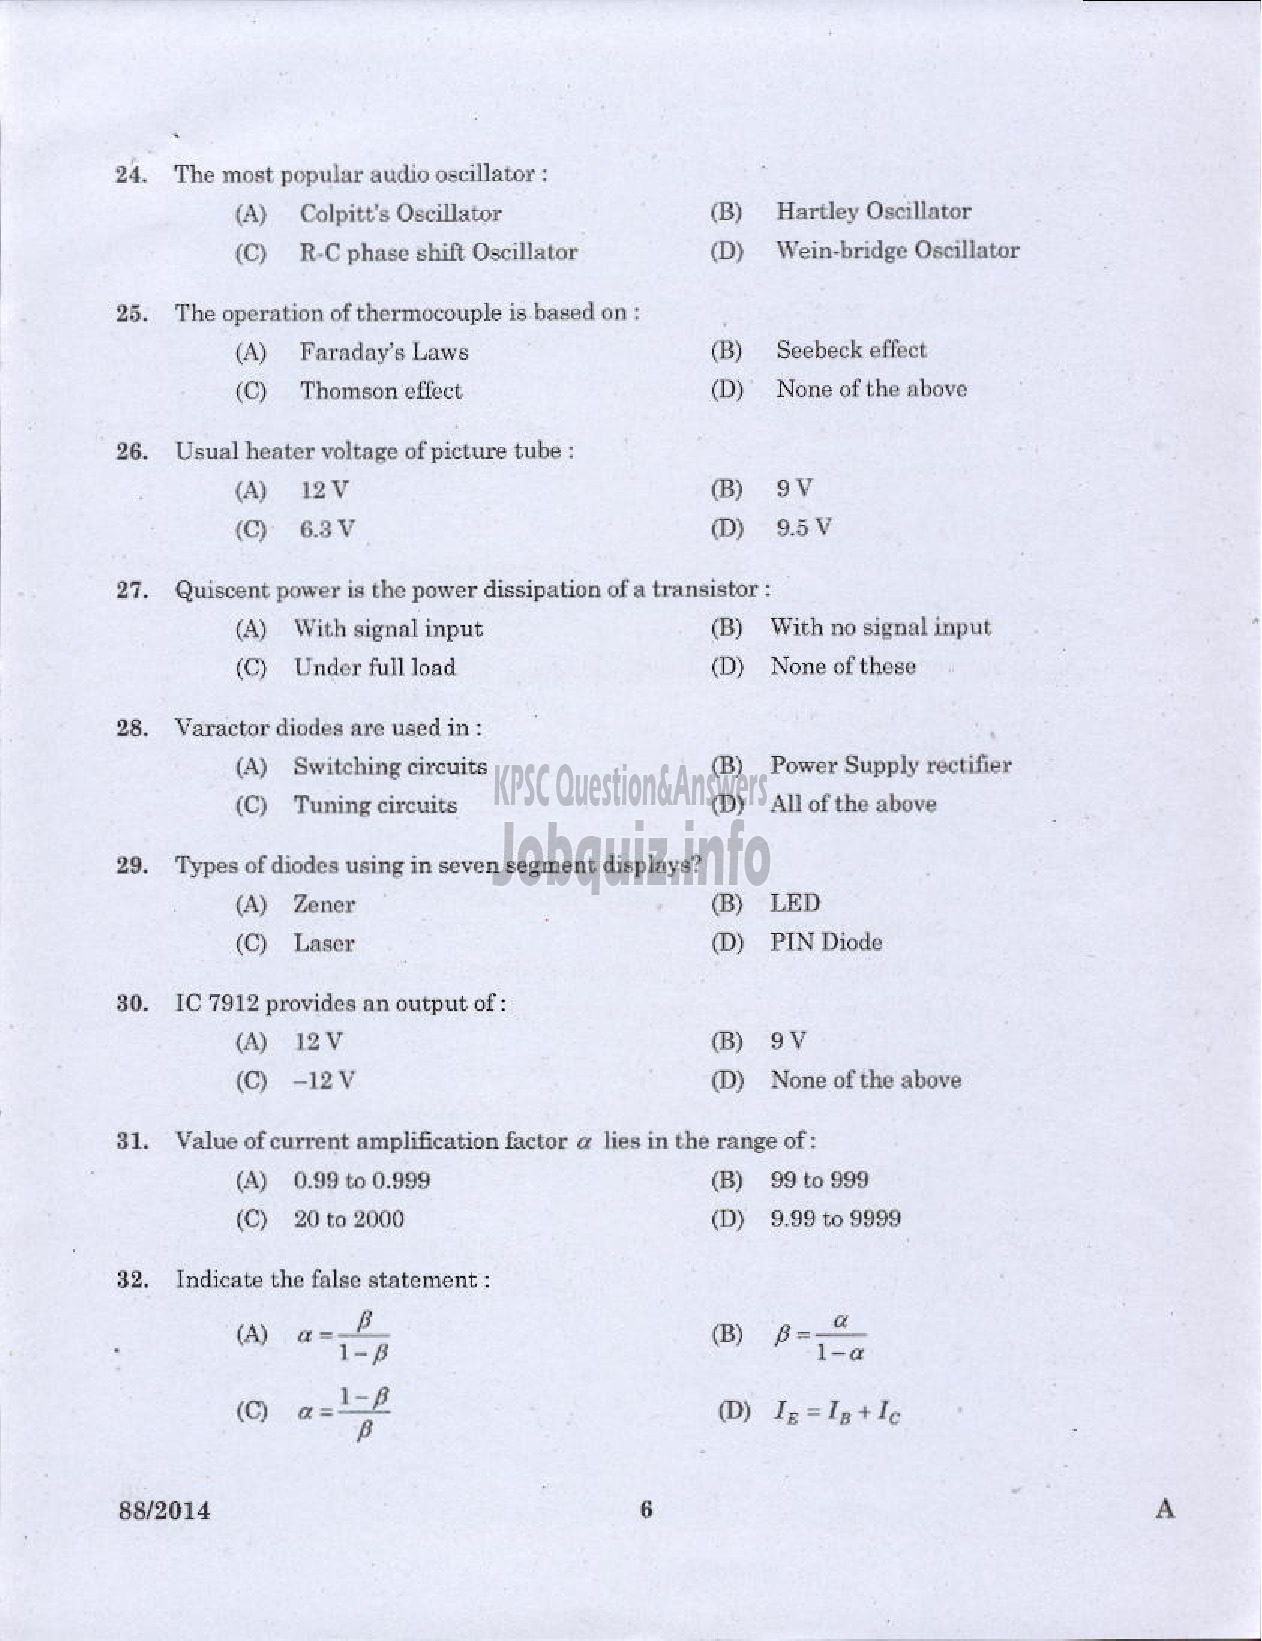 Kerala PSC Question Paper - JUNIOR INSTRUCTOR MECHANICAL CONSUMER ELECTRONICS INDUSTRIAL TRAINING DEPARTMENT-4